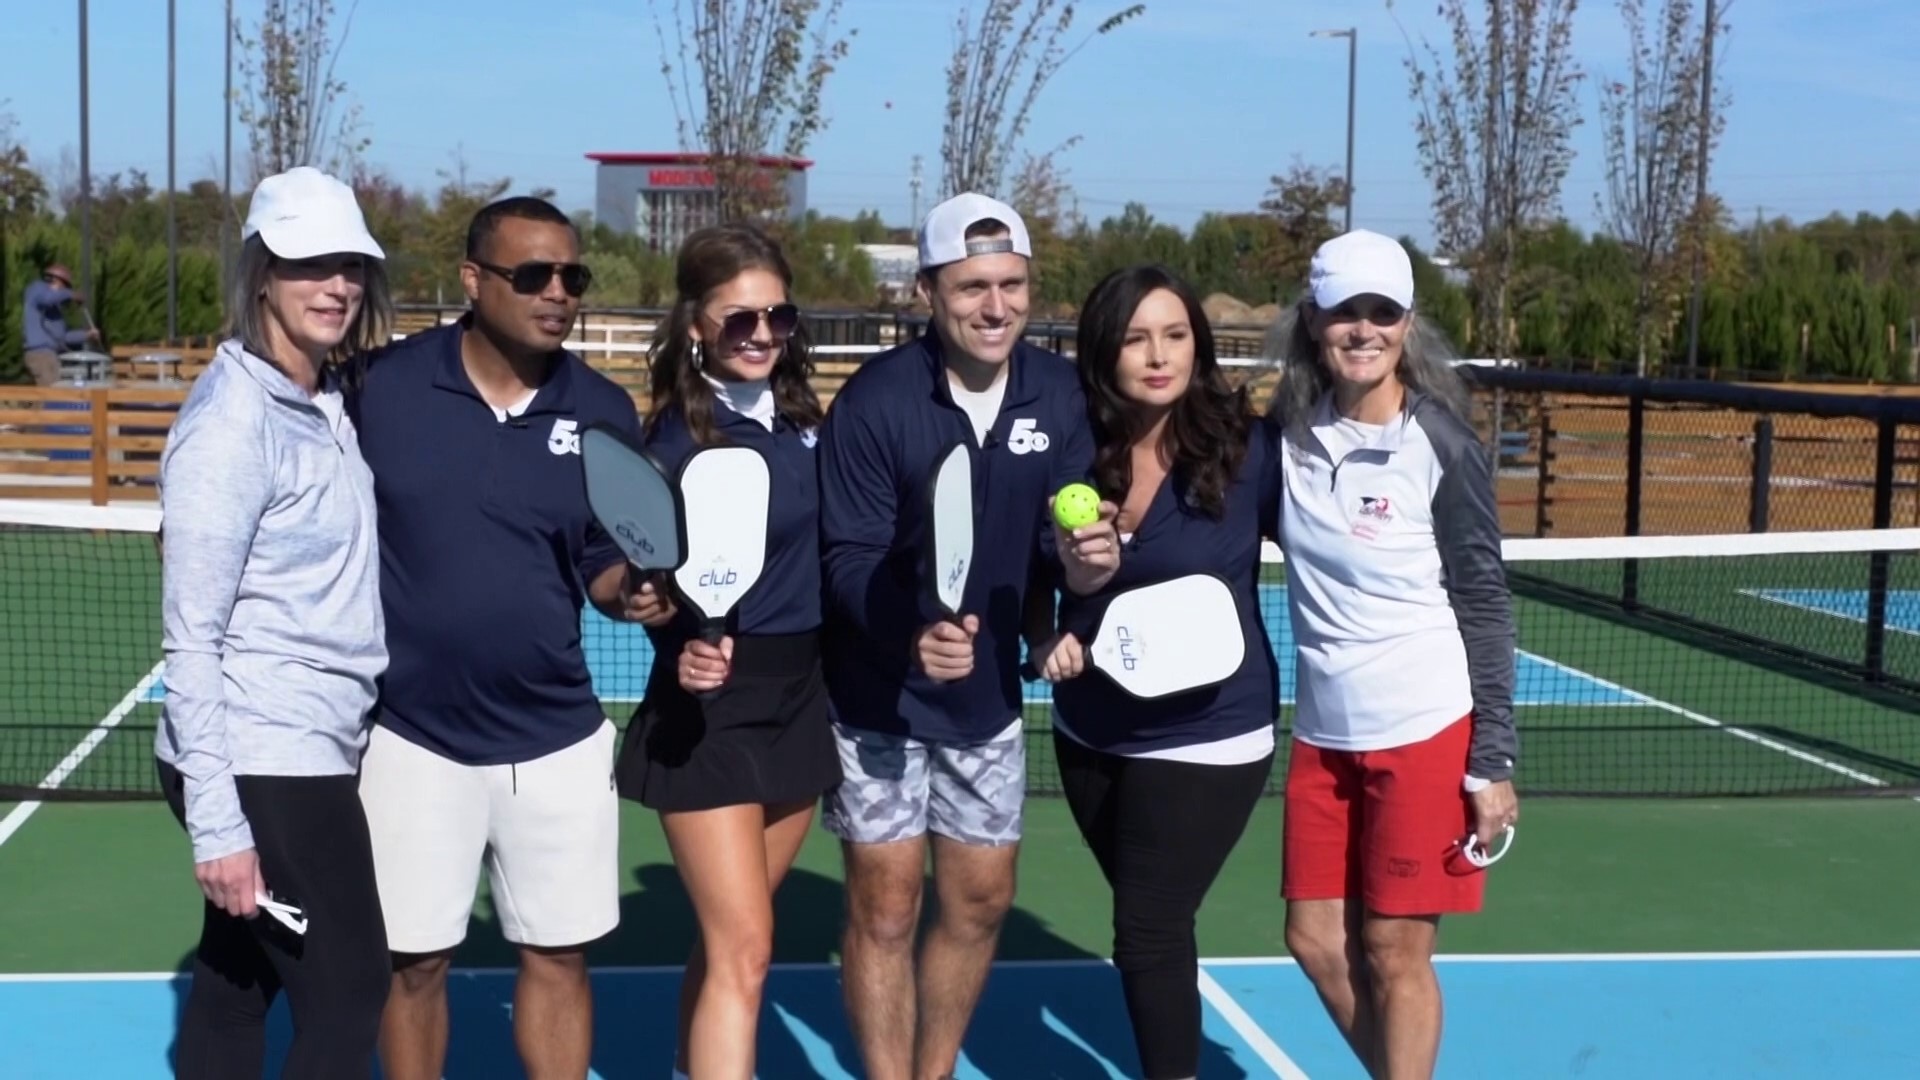 Jo, Tiffany, Ruben and Zac had a friendly competition on the pickleball courts in Bentonville.